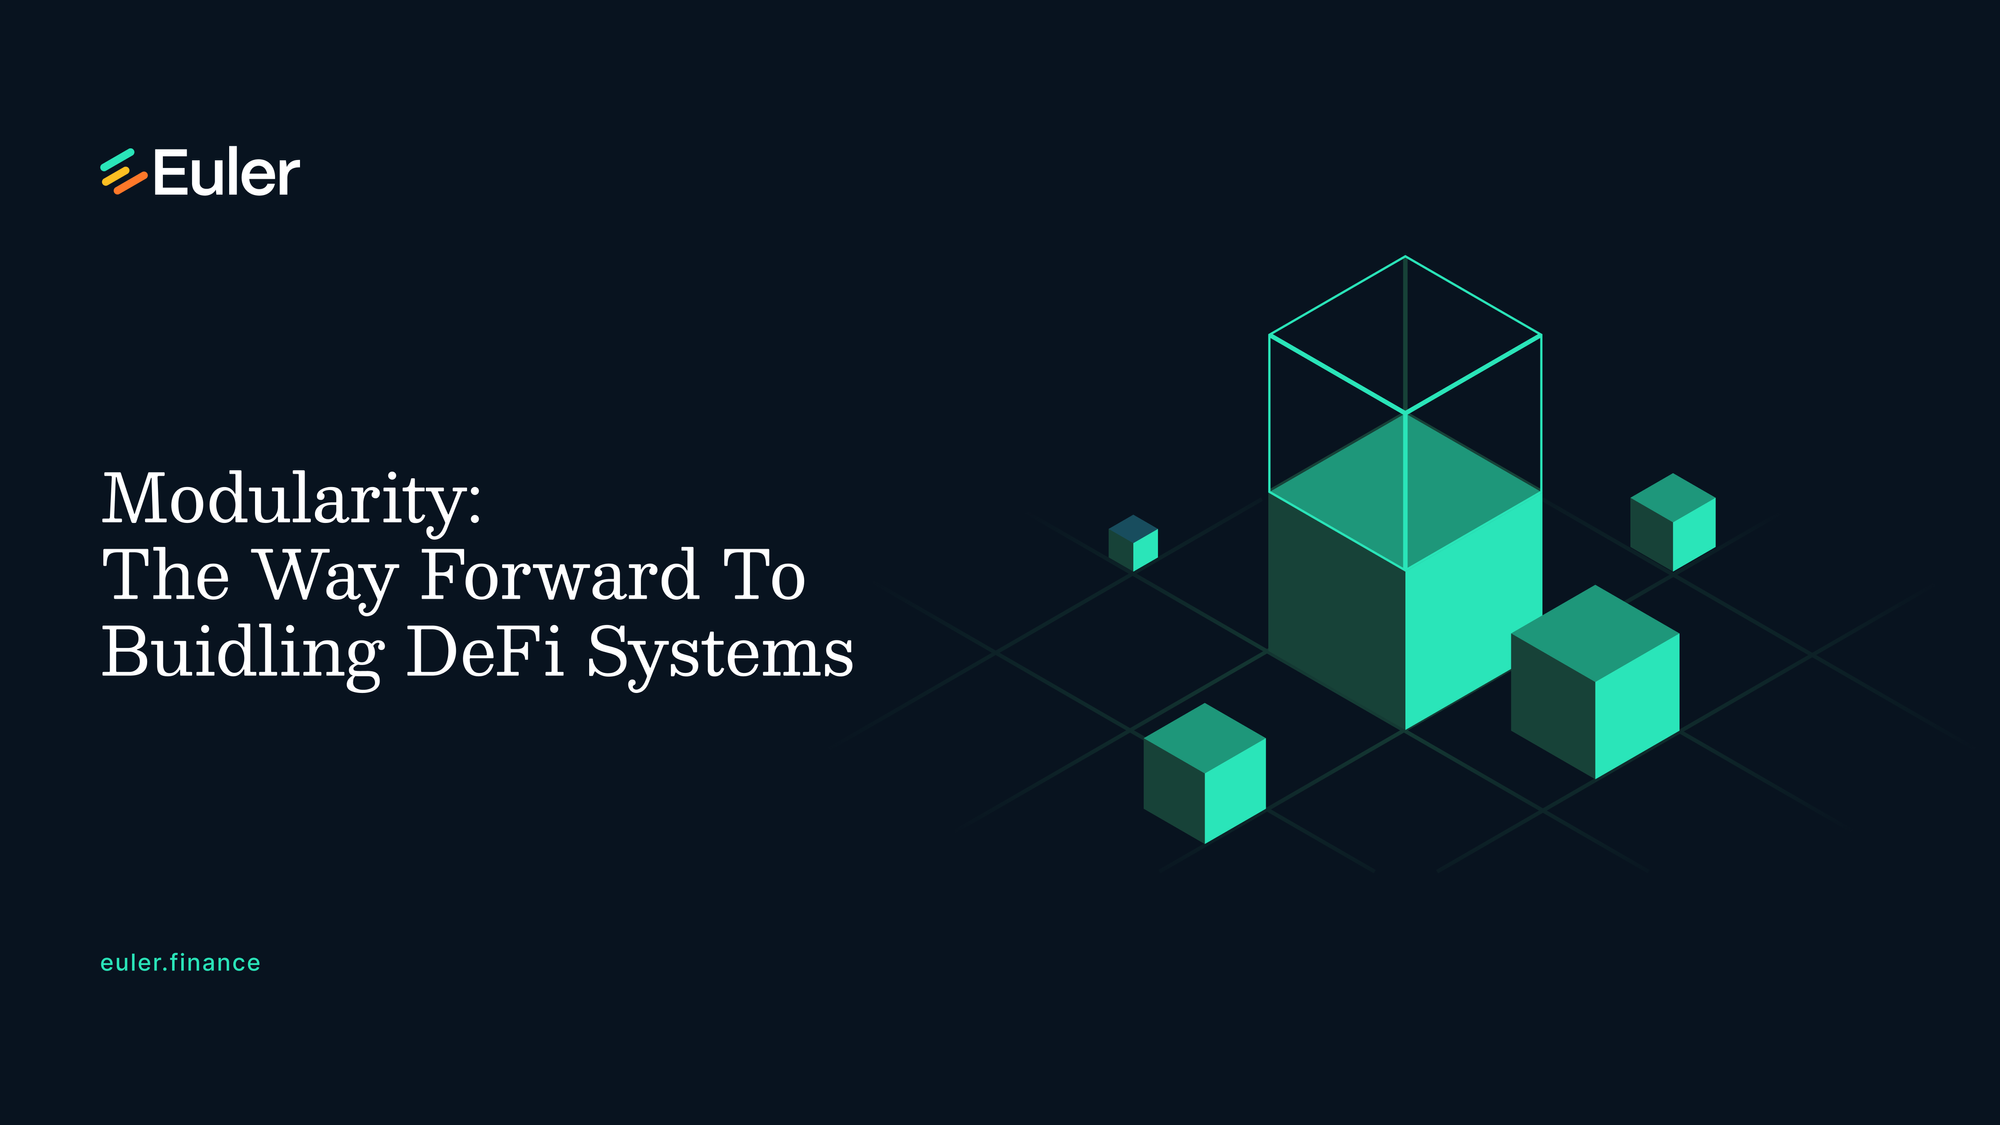 Modularity, The Way Forward To Building DeFi Systems